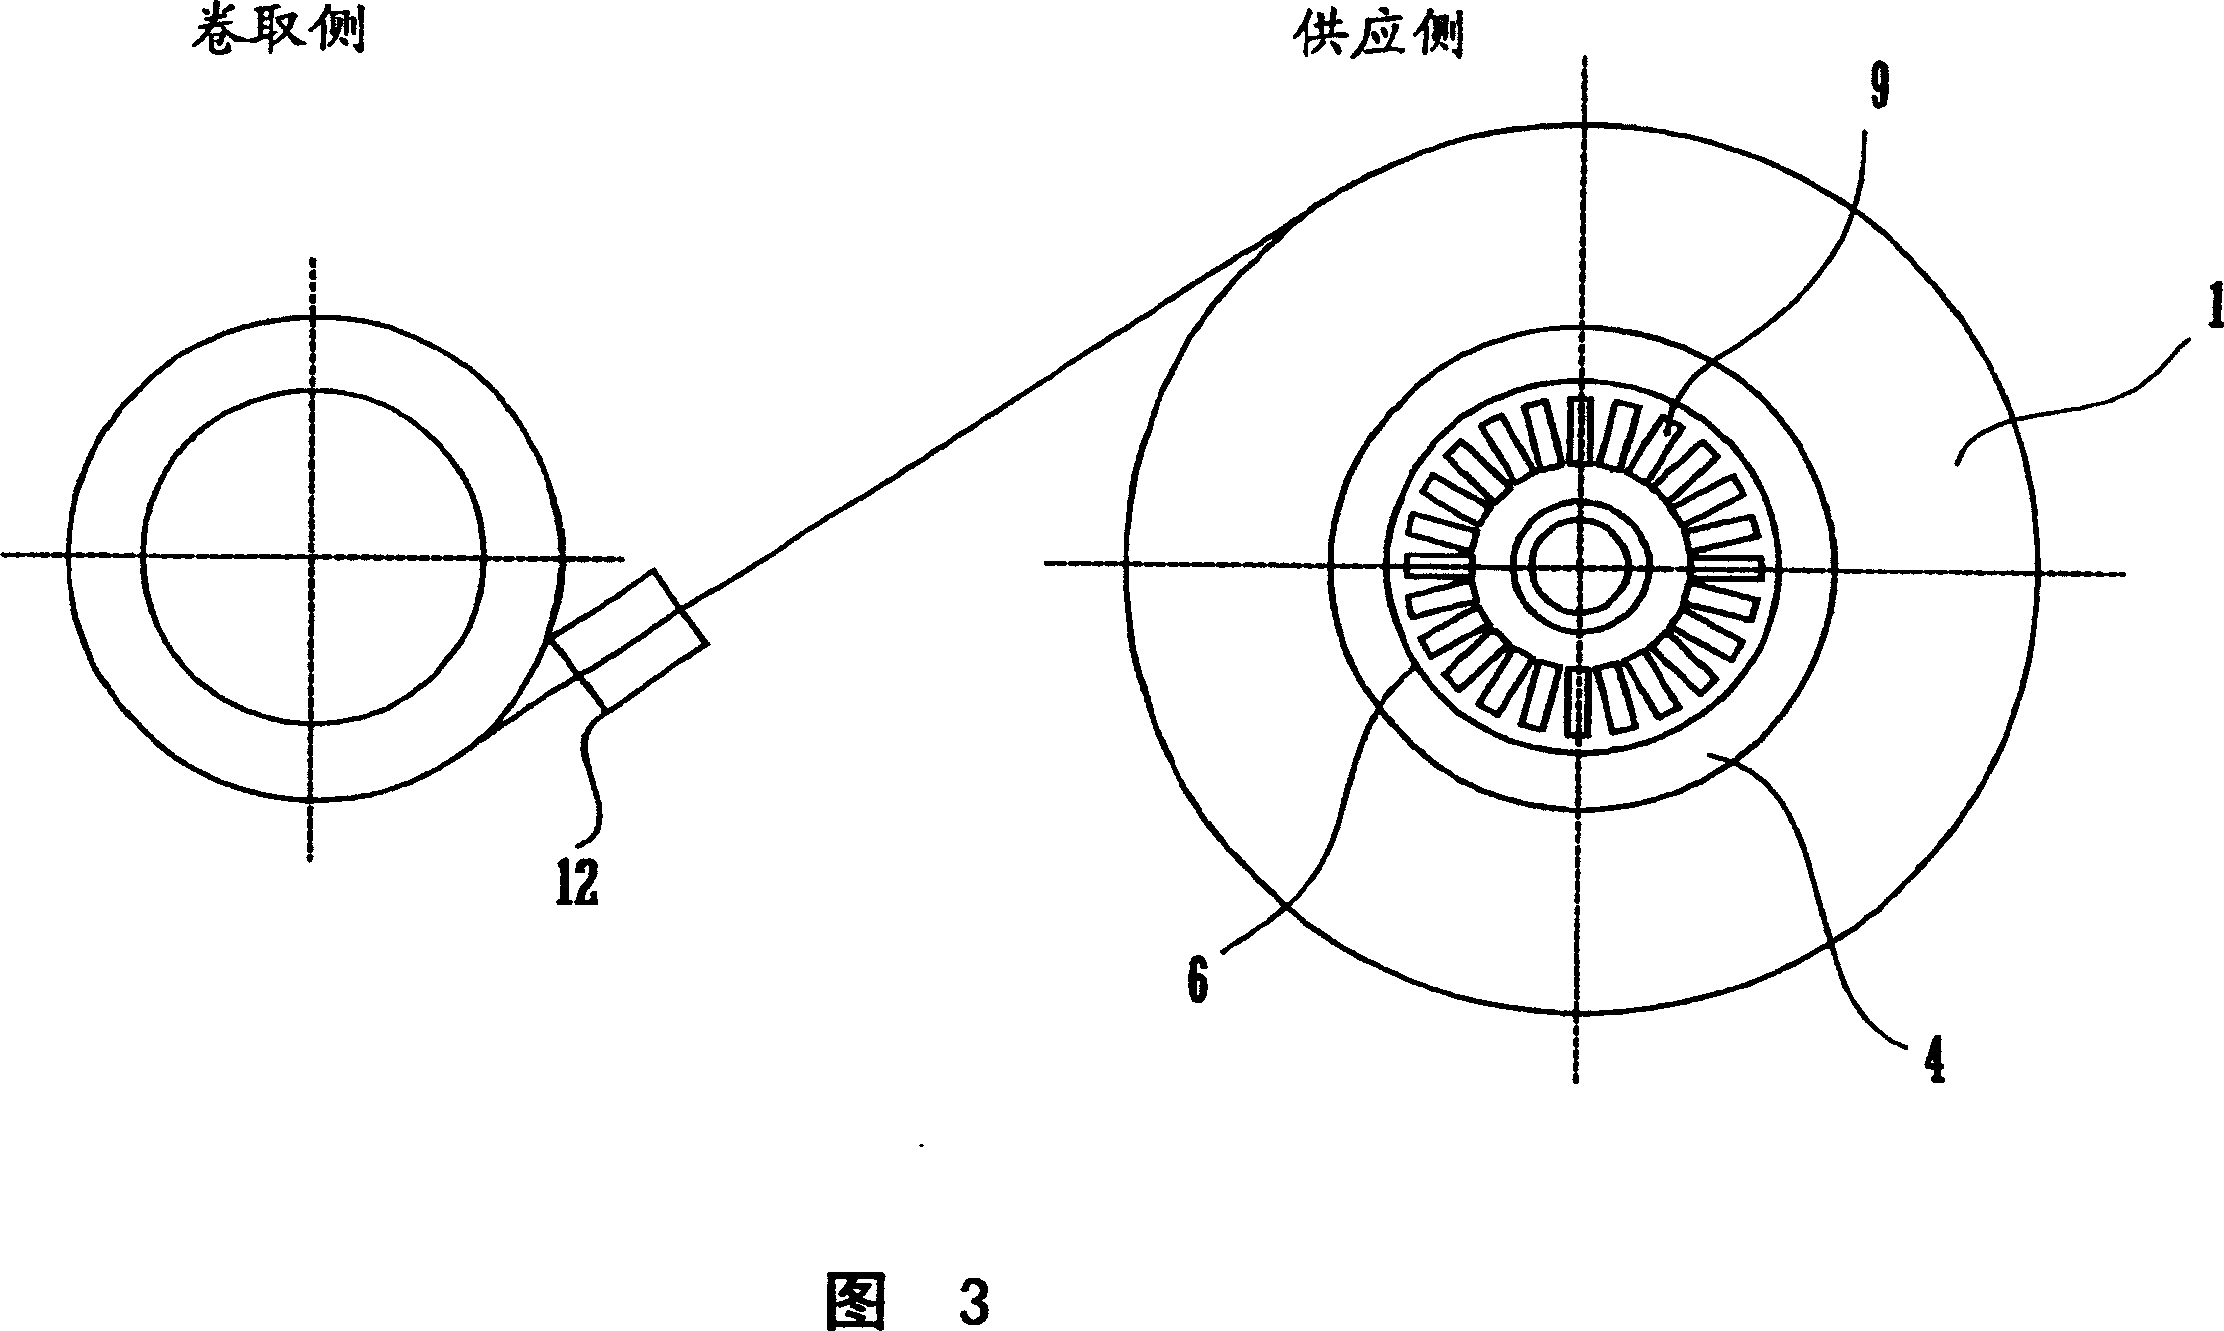 A ink ribbon unit with supporting device and image printing equipment